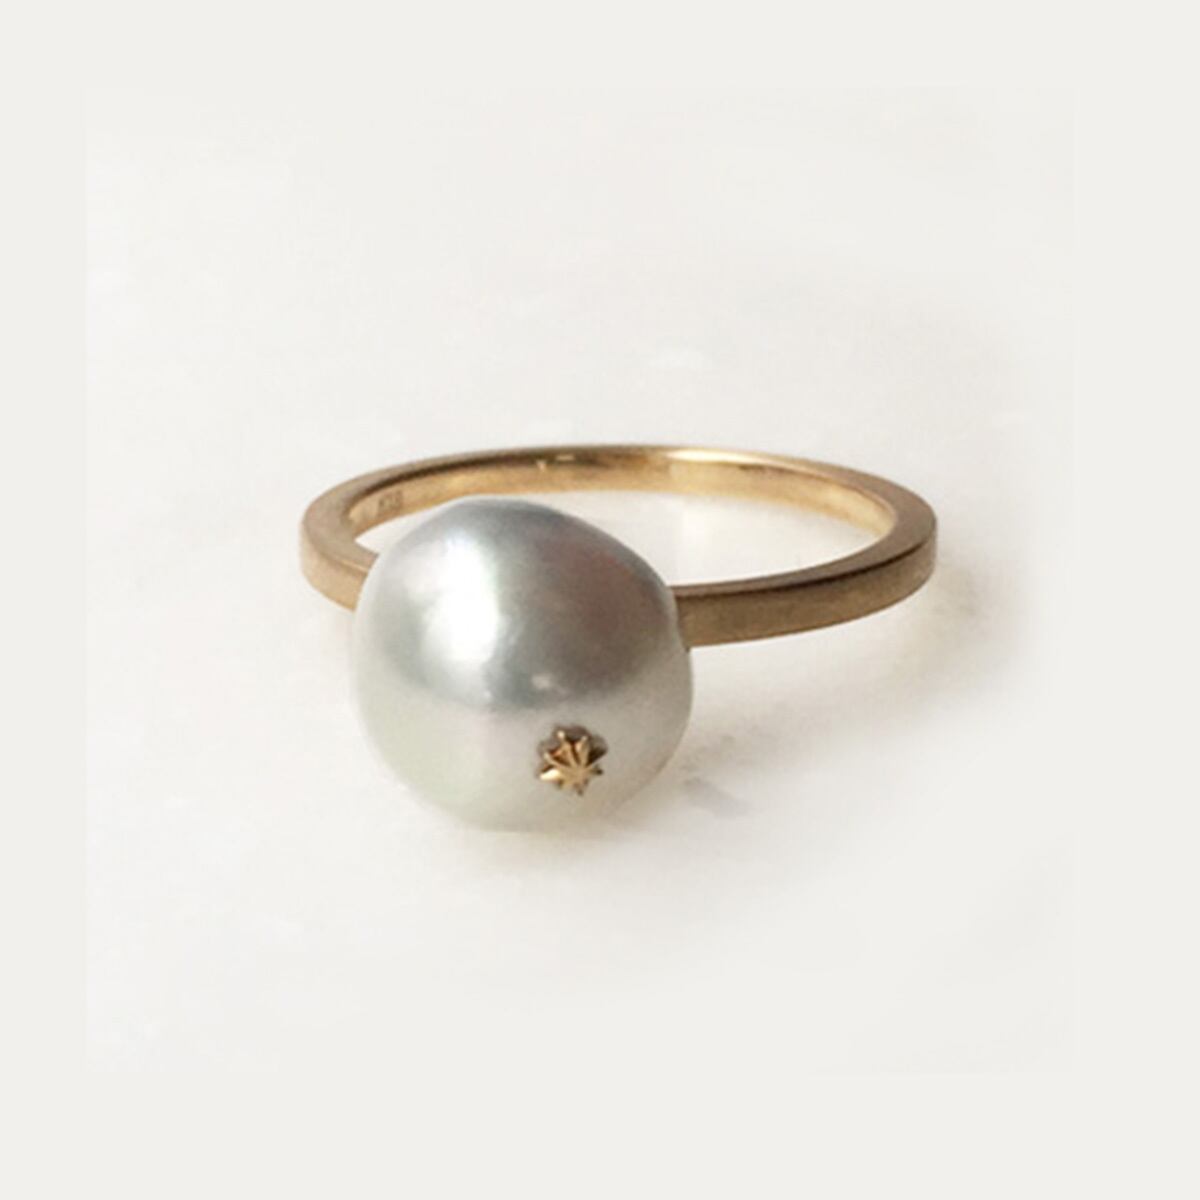 One n' Only / Star on Pearl / Akoya Pearl Ring (CR020-AK)